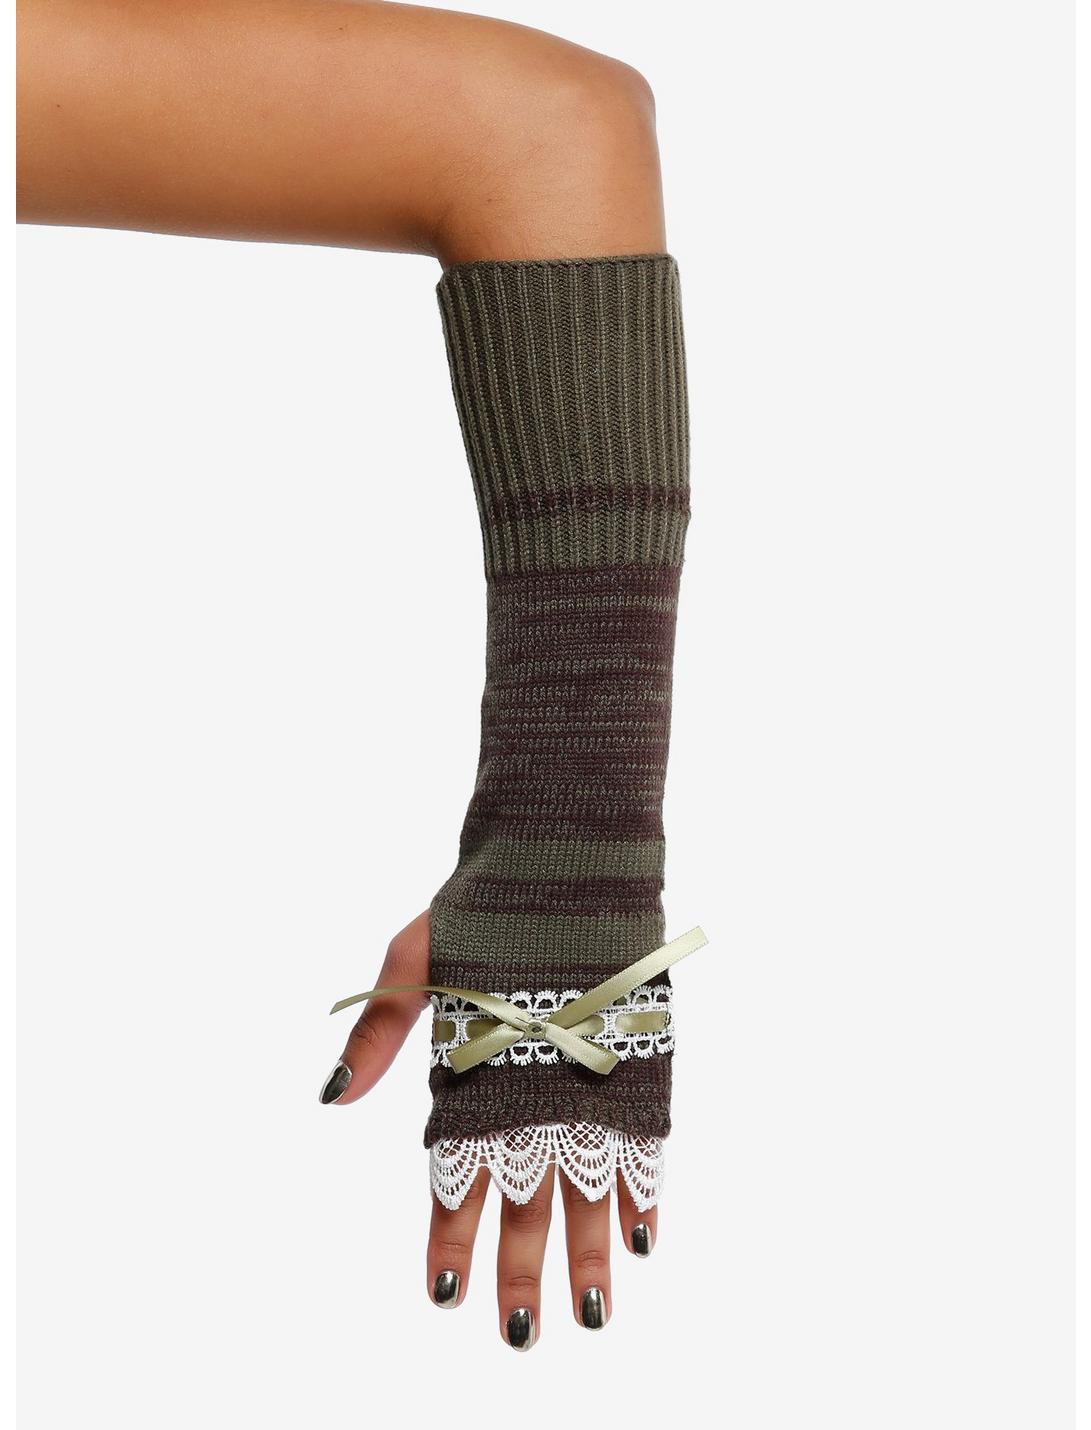 Green Stripe Lace Arm Warmers, , hi-res